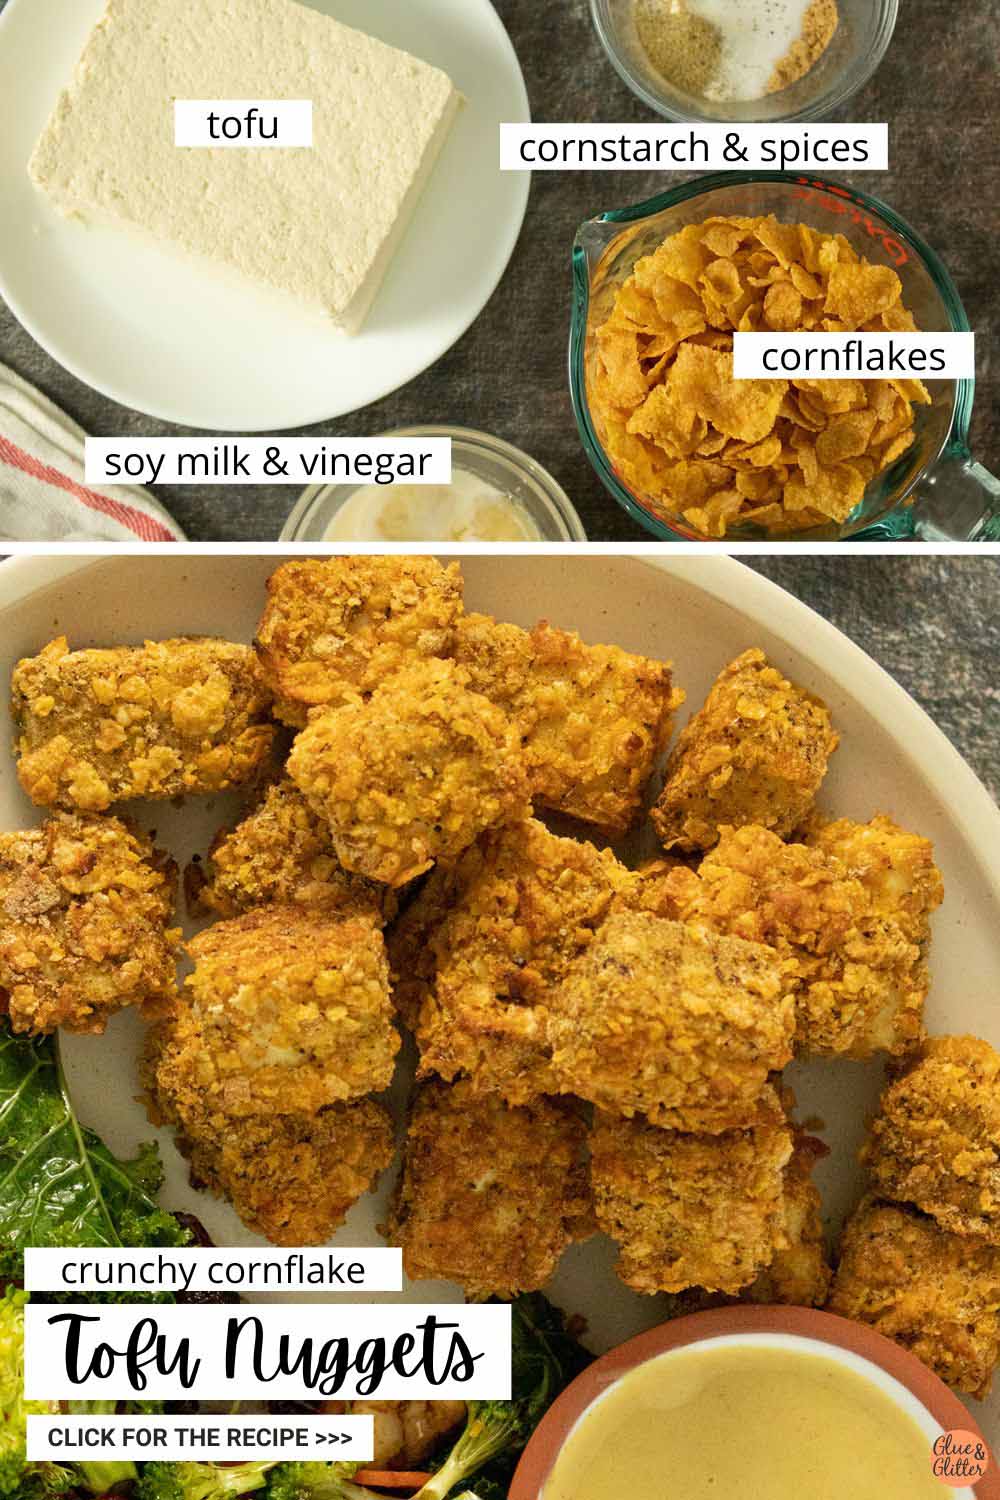 image collage showing tofu, cornflakes, vegan buttermilk, and a bowl of spices on a slate table and a picture of the finished tofu nuggets